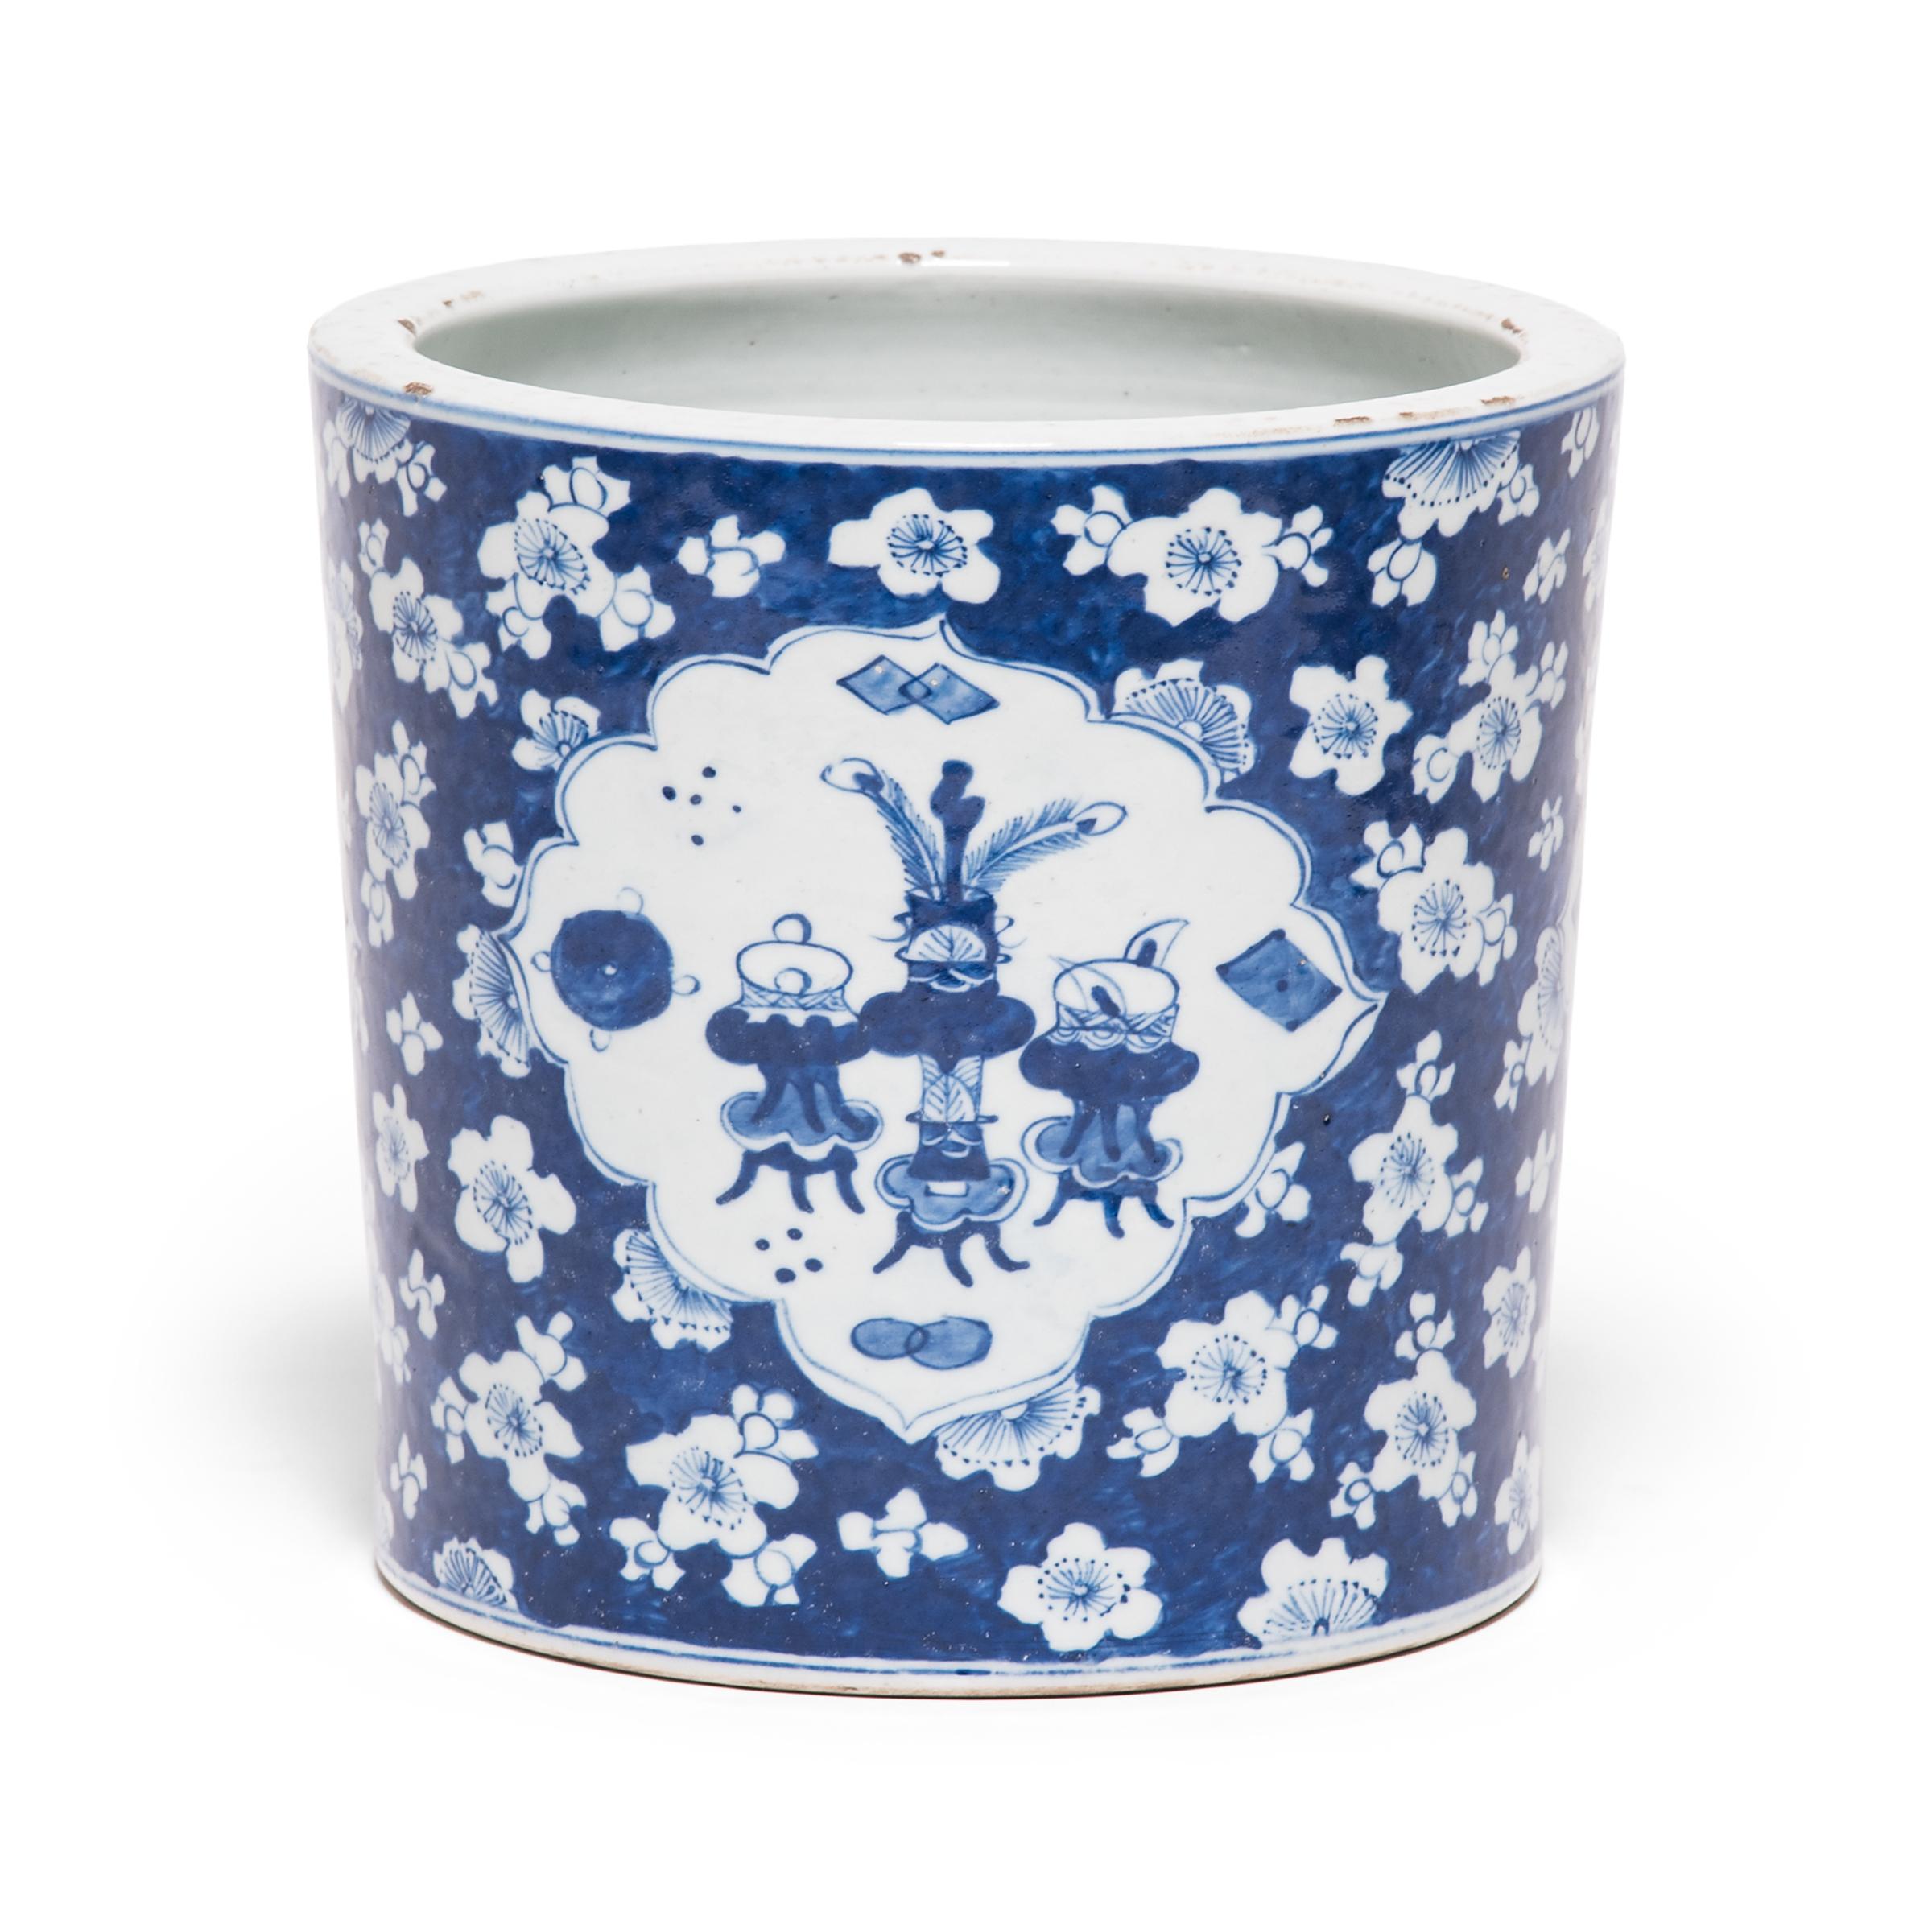 Emulating the look of Classic blue-and-white Chinese porcelain, this contemporary porcelain brush pot would have been right at home on a scholar’s desk. Beautifully decorated with an all-over floral pattern, the pot features cartouches filled with